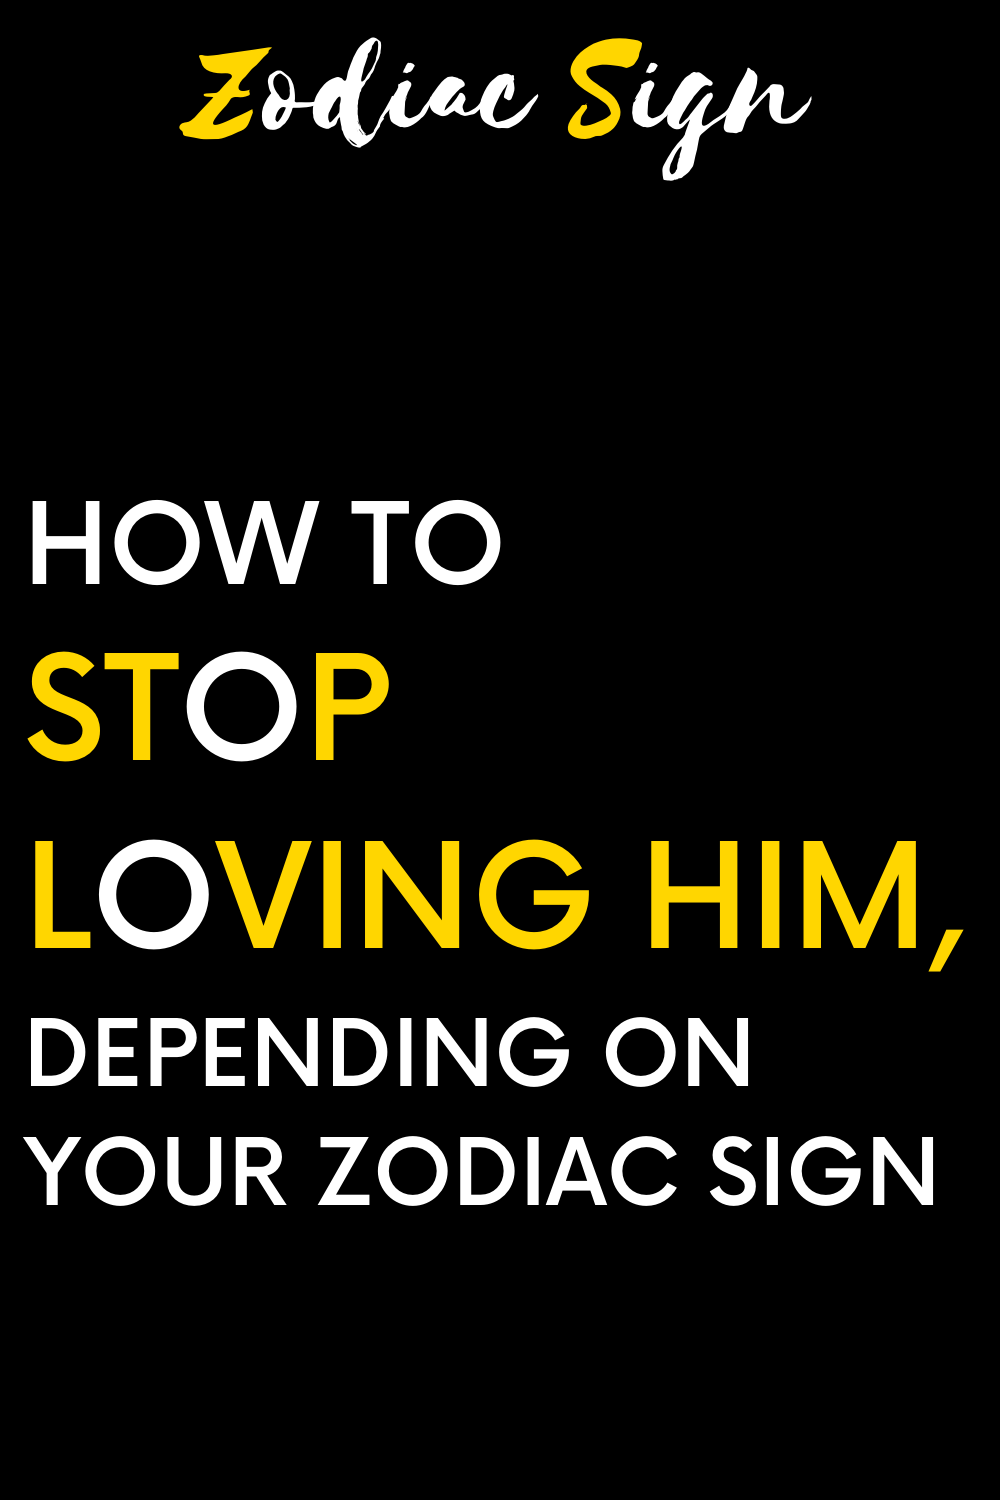 How to stop loving him, depending on your zodiac sign